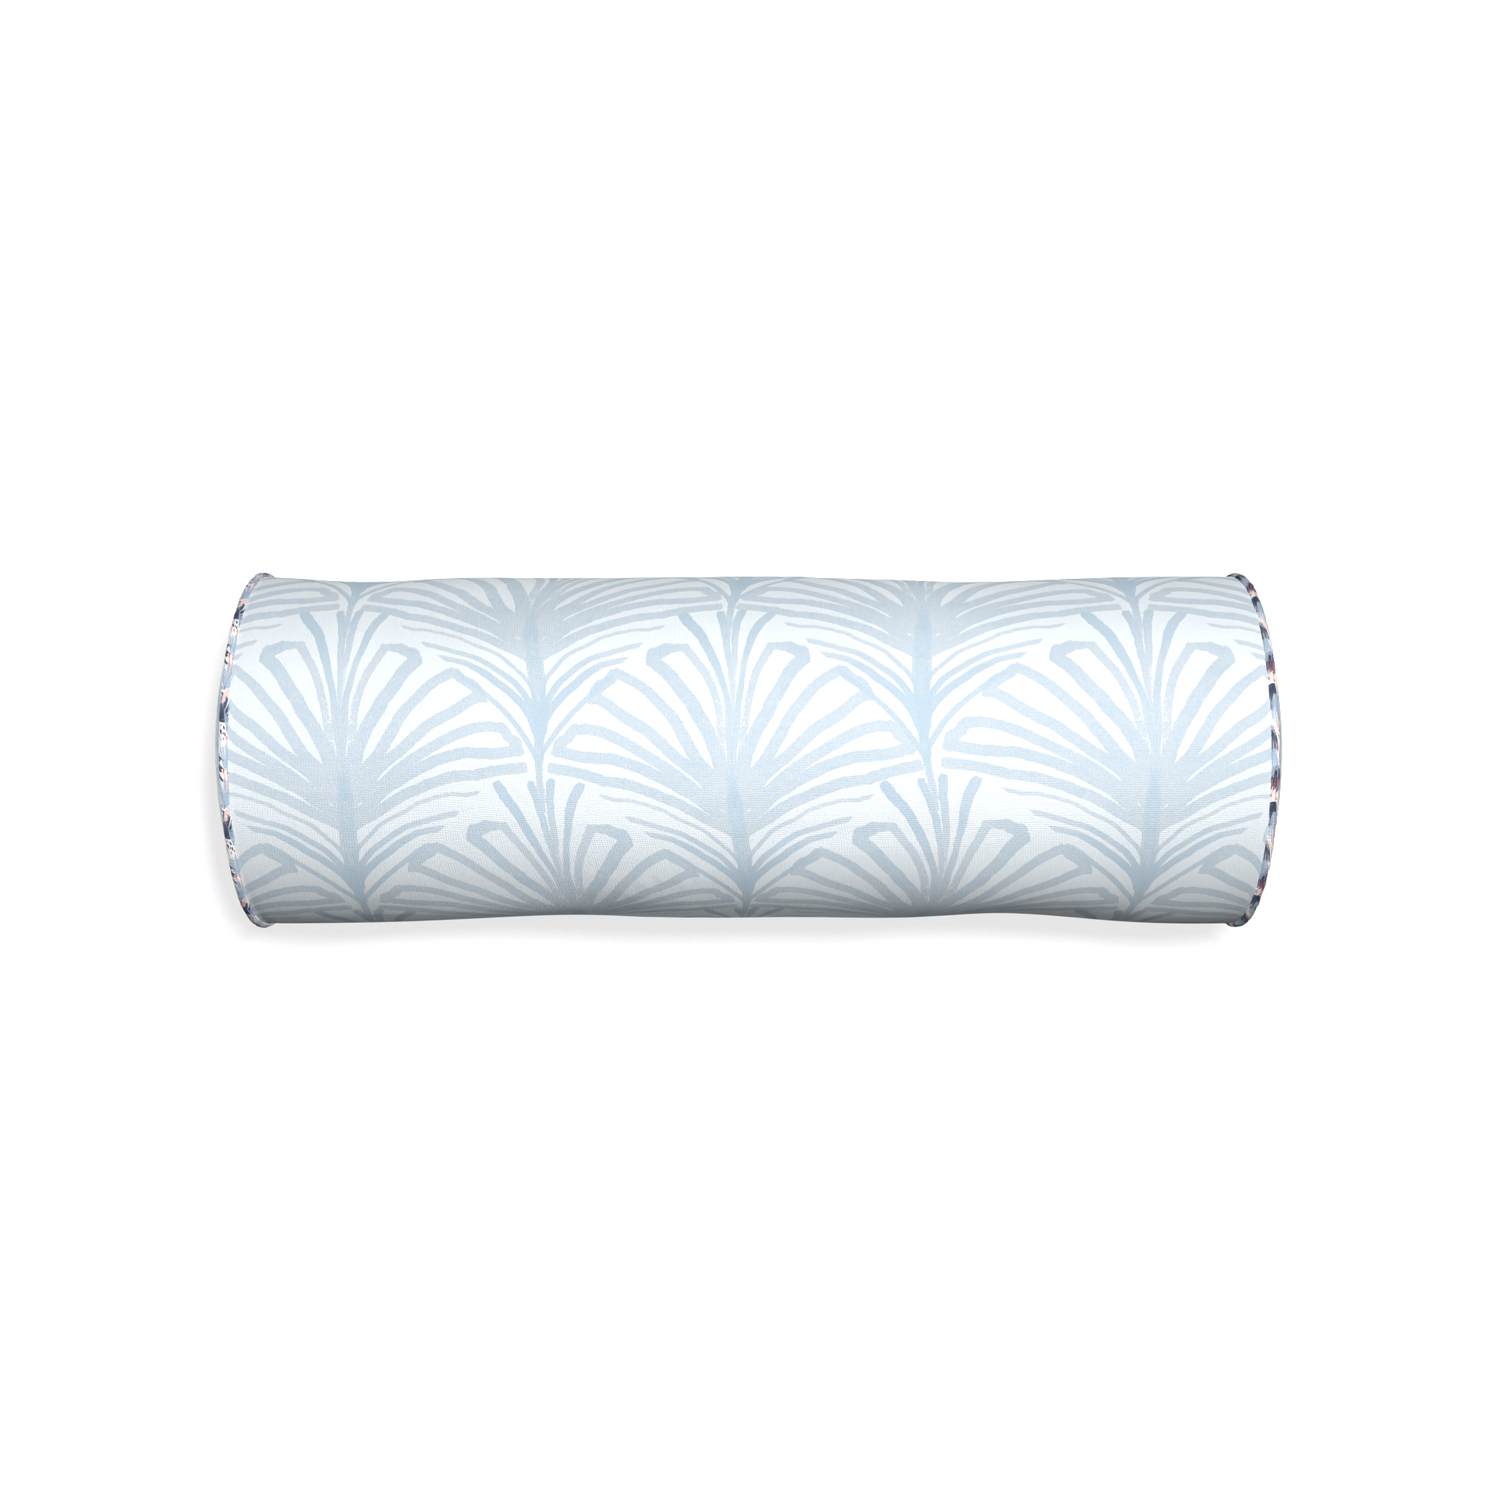 Bolster suzy sky custom sky blue palmpillow with e piping on white background